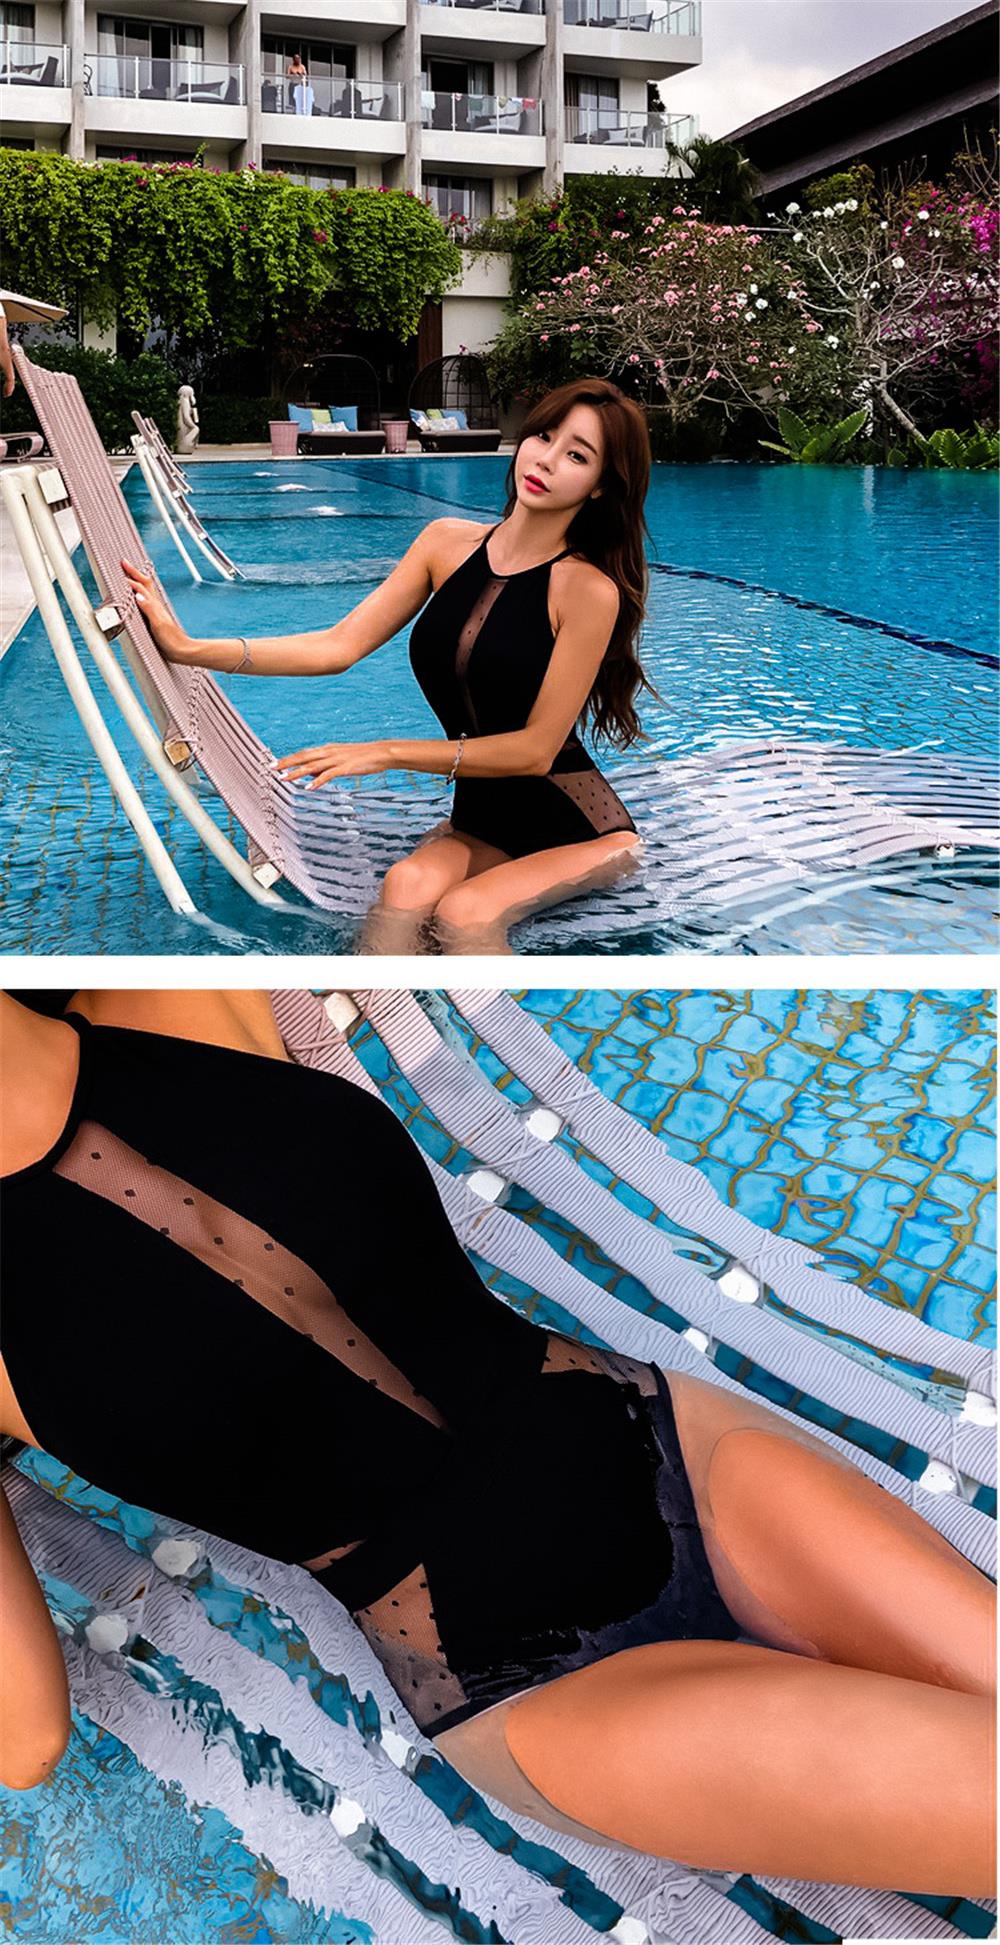 Lilly at the lake Mesh Cut Hollow Out Deep V Neck High Waist Swimsuit one piece